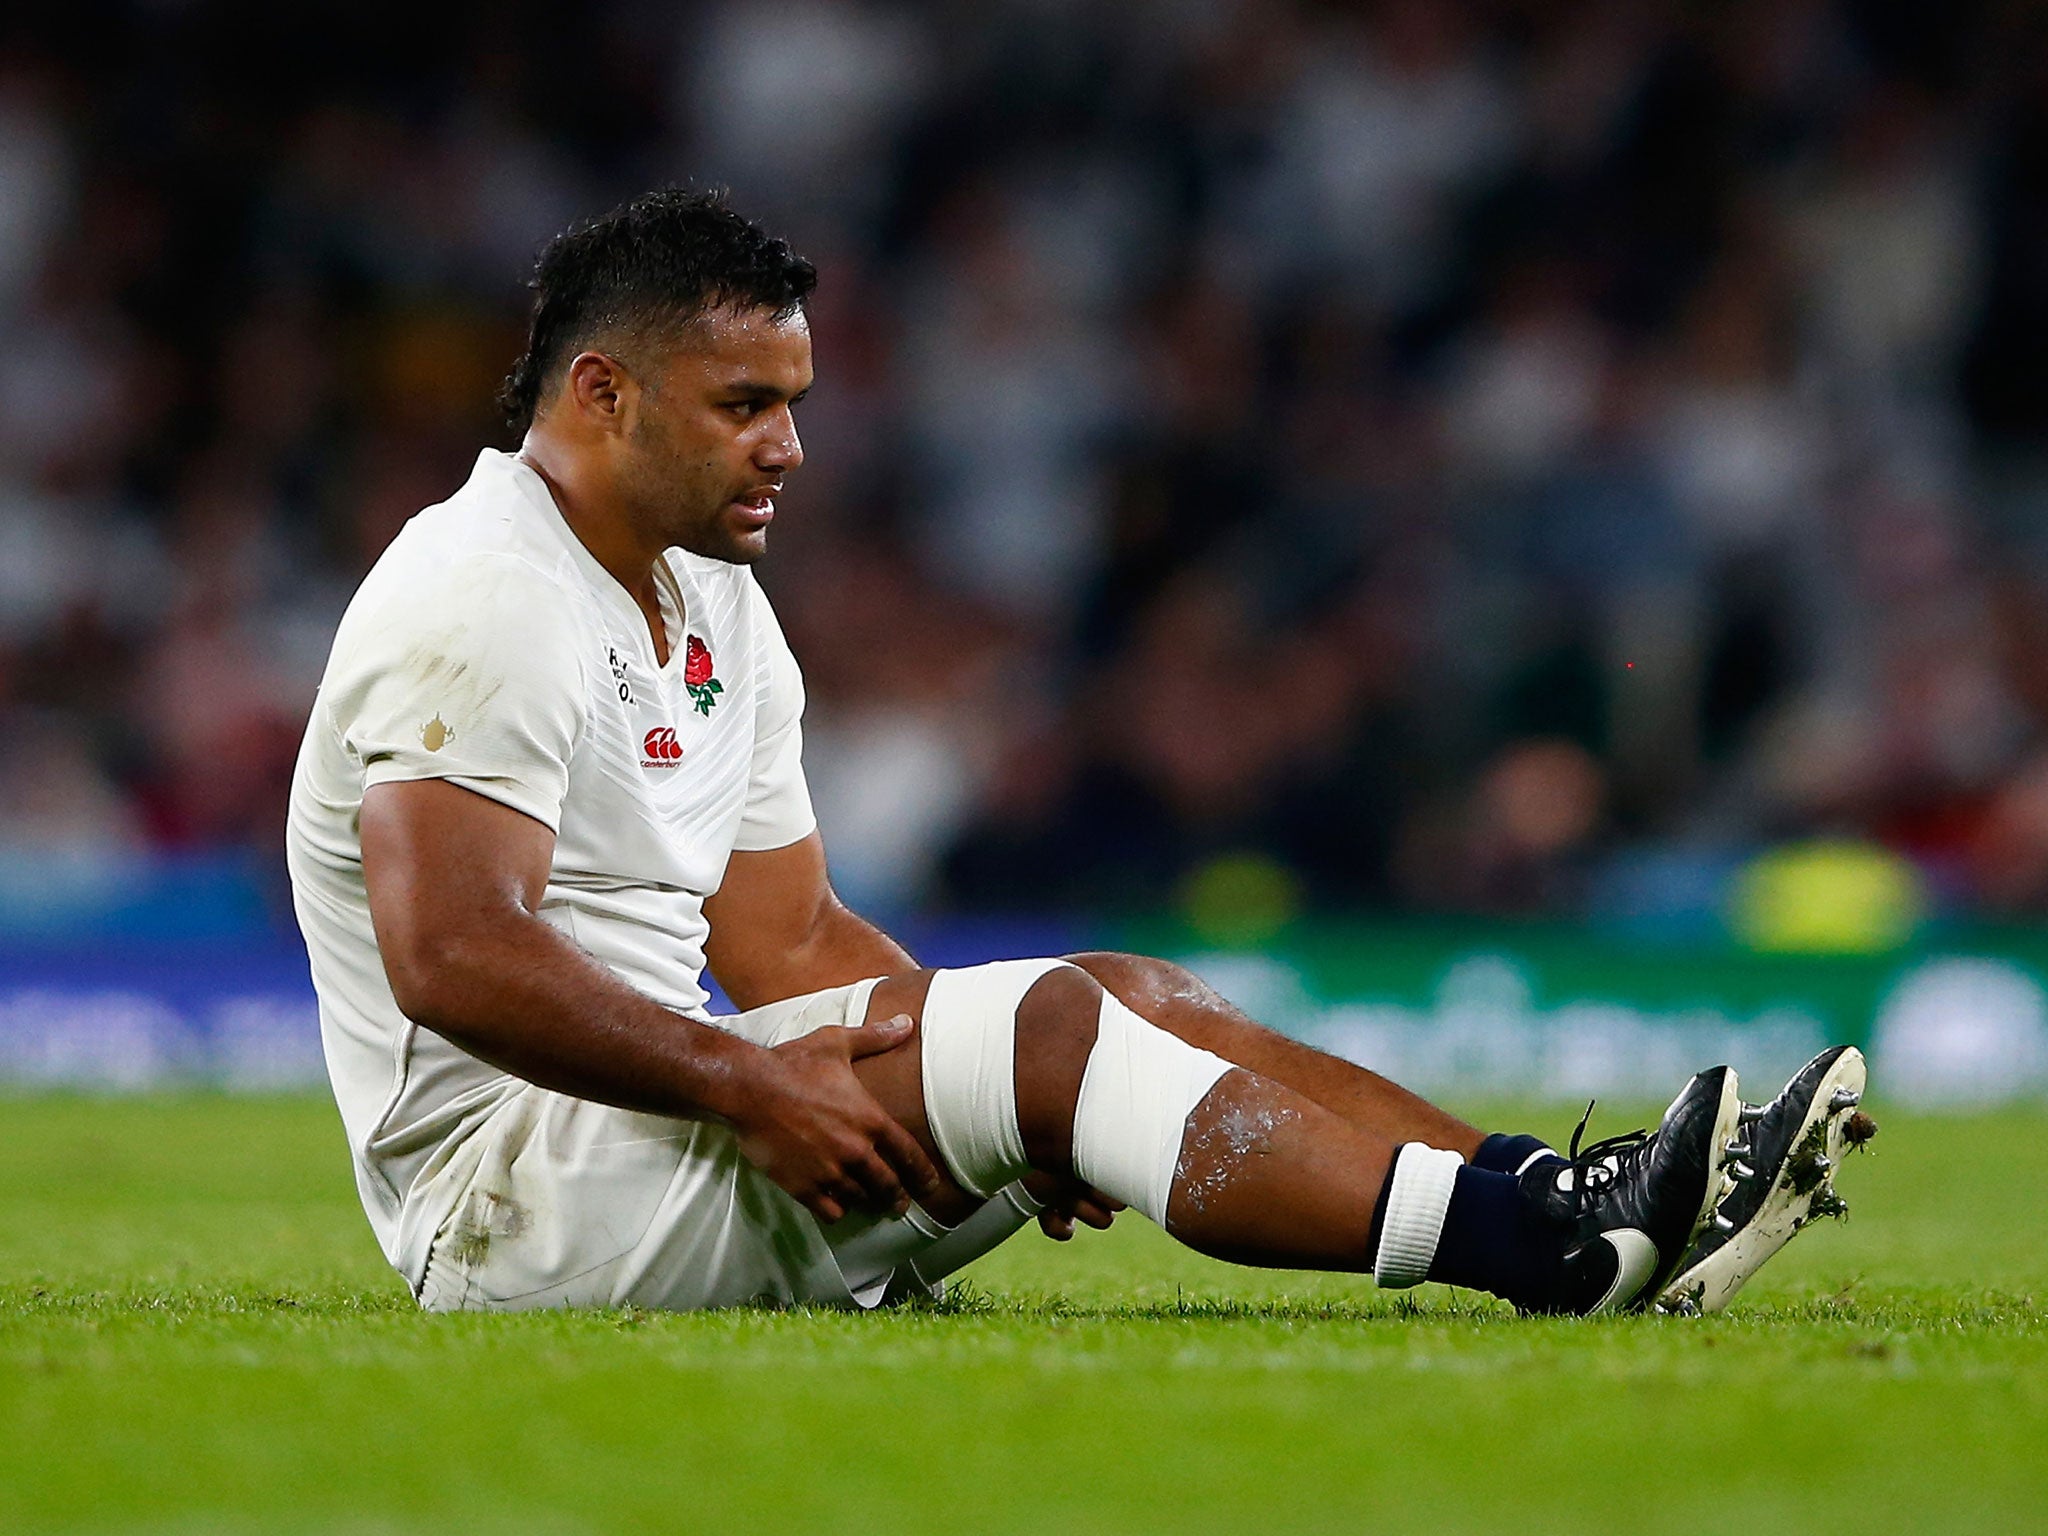 Eddie Jones will be without Billy Vunipola for this year's Six Nations competition